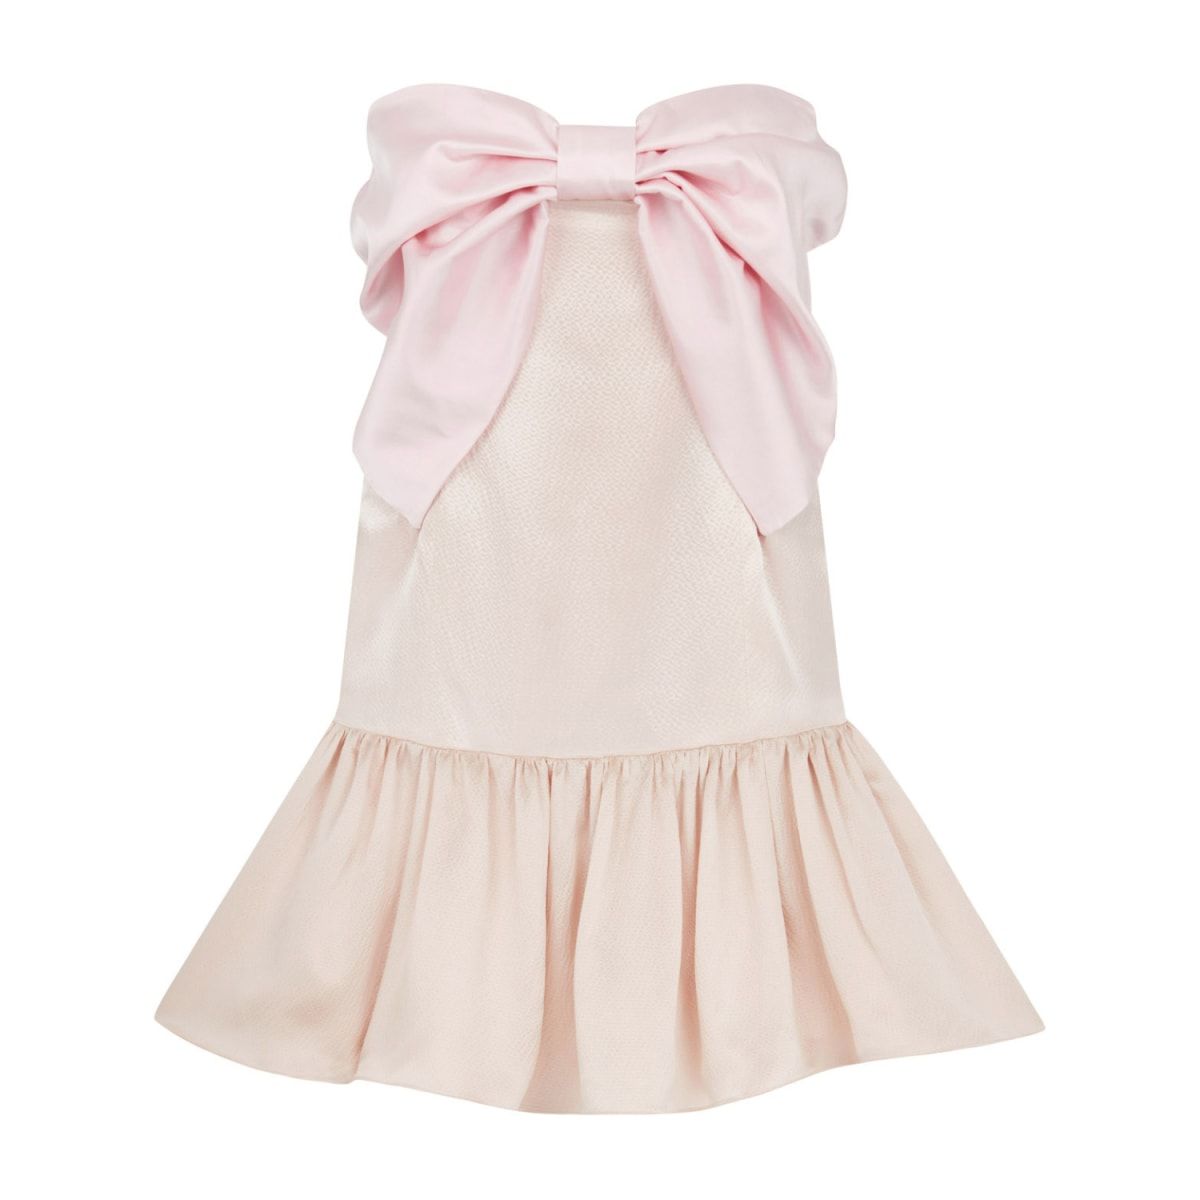 Cupid bow dress | Wolf & Badger (US)